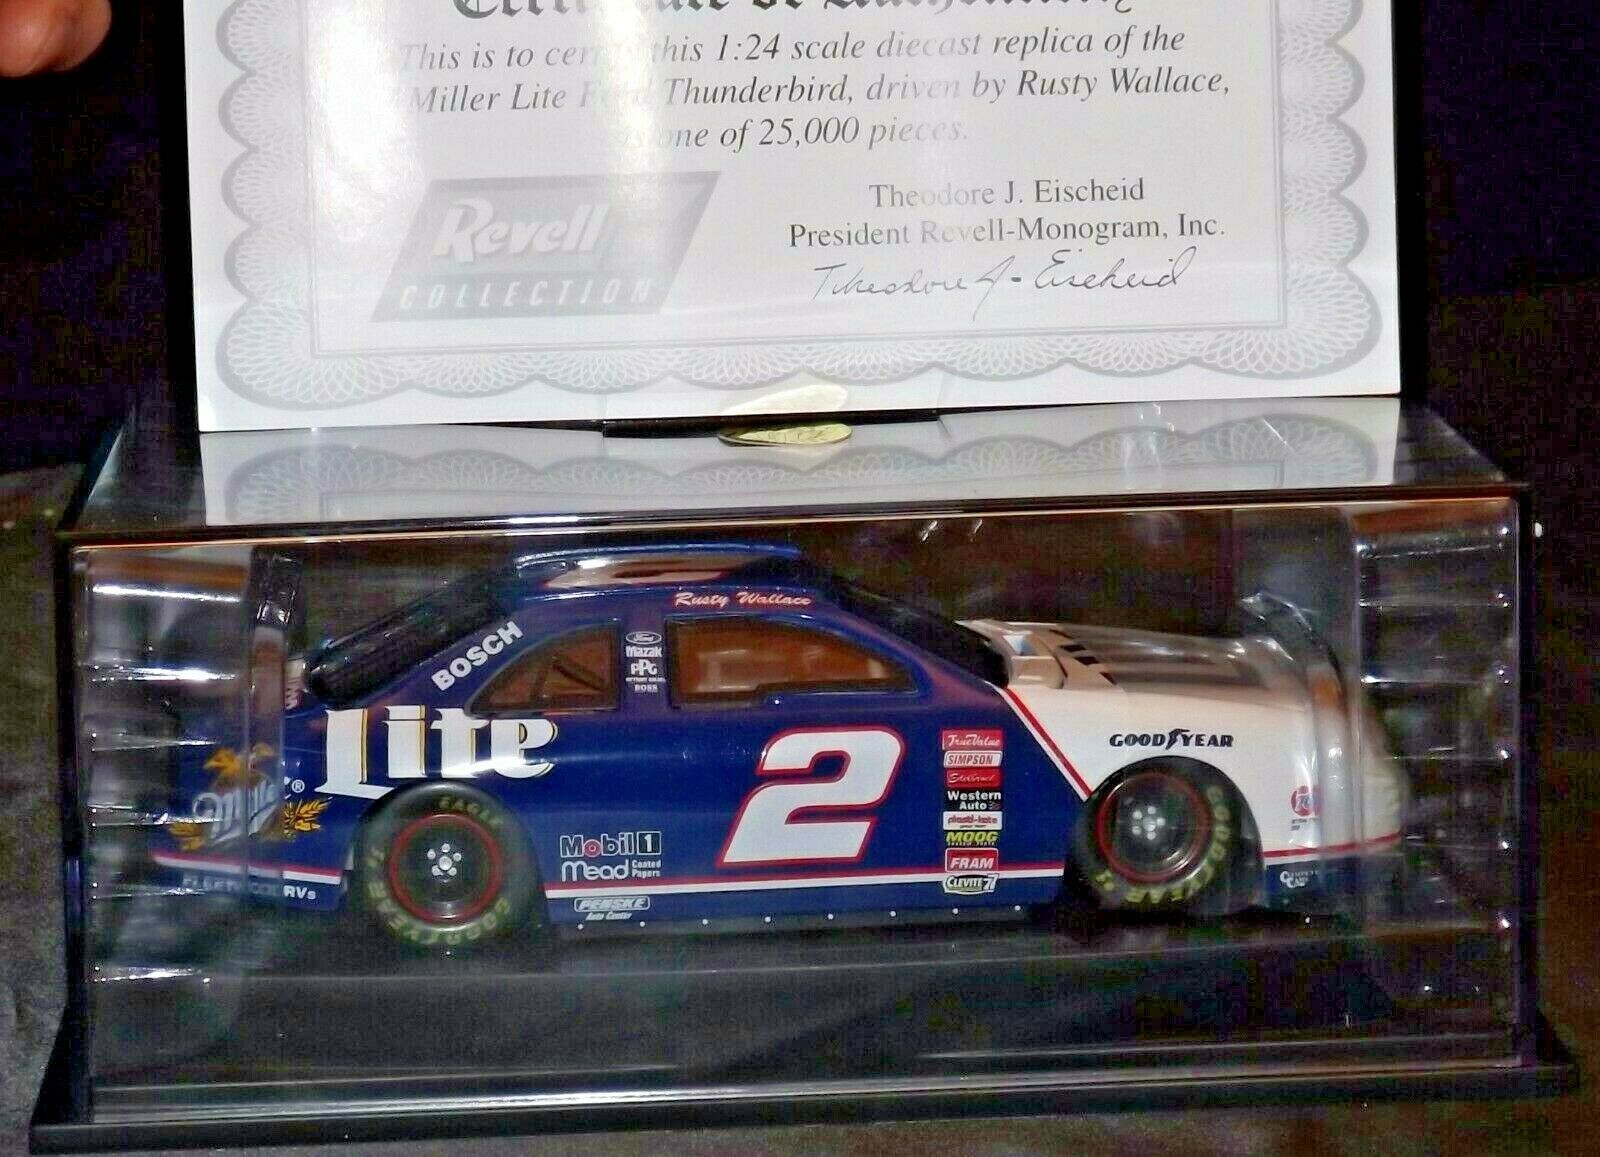 1:43 Scale Diecast Details about   Rusty Wallace #2 Revell Miller Lite 1997 Ford Thunderbird 